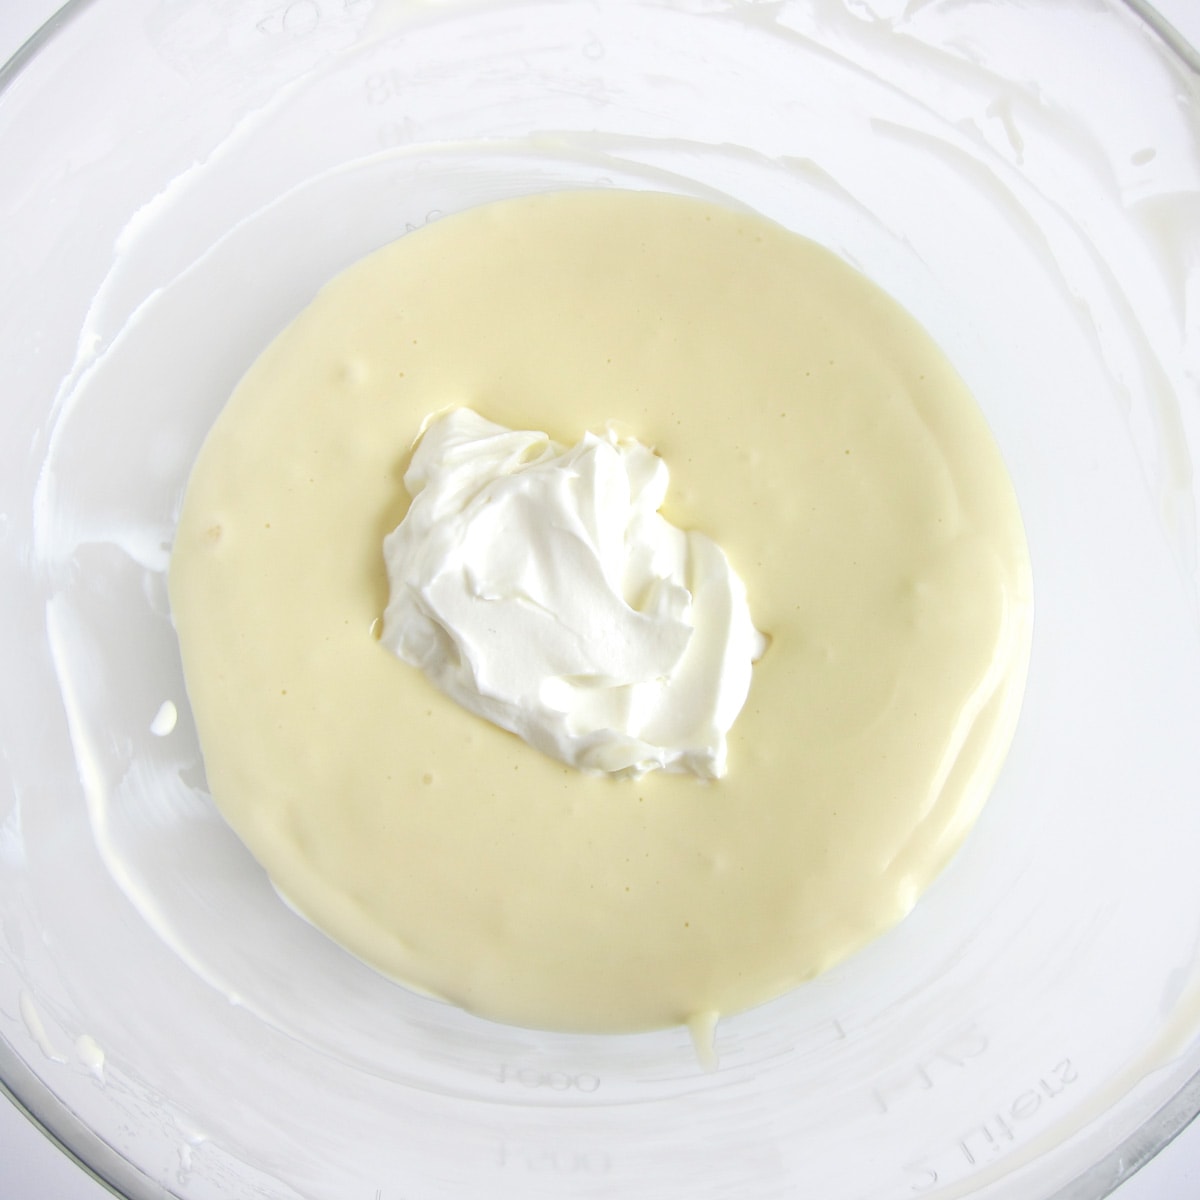 Add sour cream to the cheesecake filling.